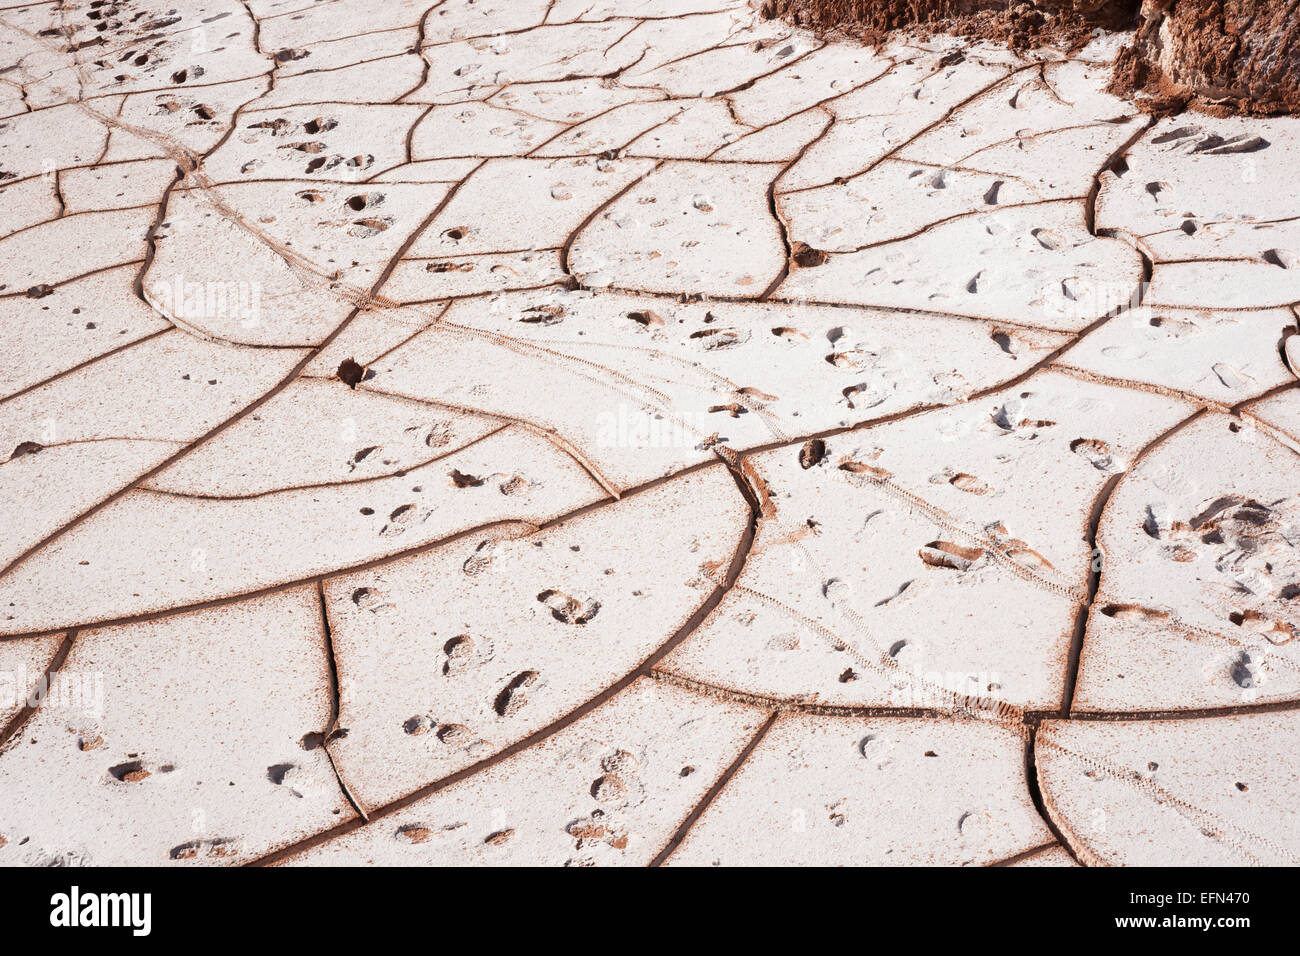 Footsteps and cracked clay on white floor of Moon Valley, Atacama Desert, San Pedro, Chile, South America Stock Photo